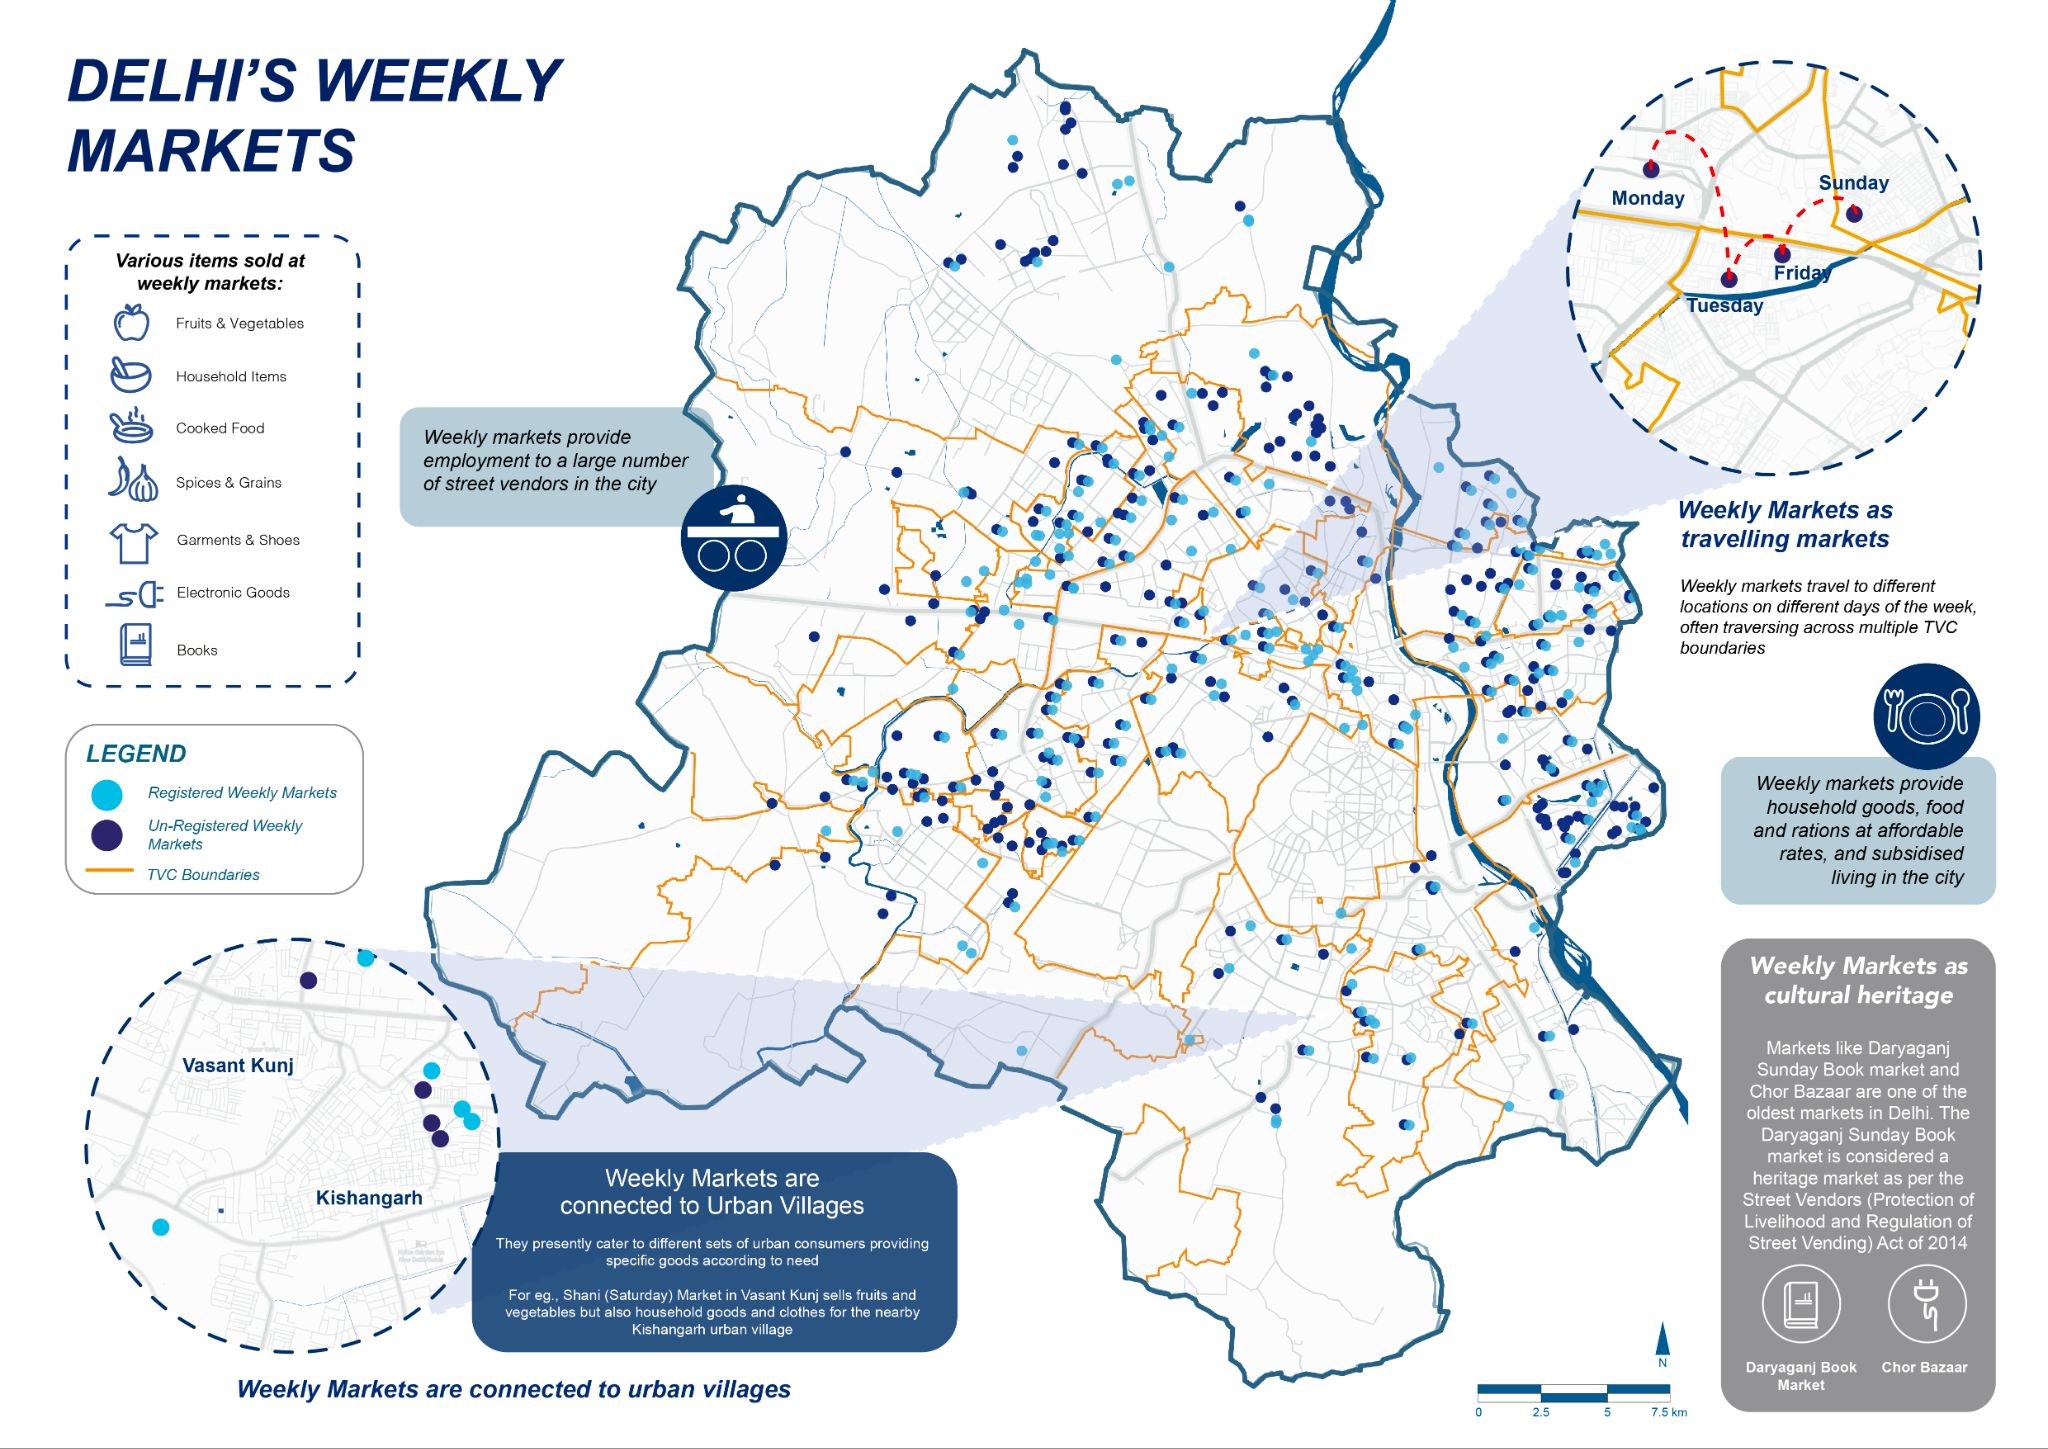 Weekly markets in Delhi. Conceptualised by Focal City Delhi, designed by Social Design Collaborative and based on government documents and field-level data from Janpahal.